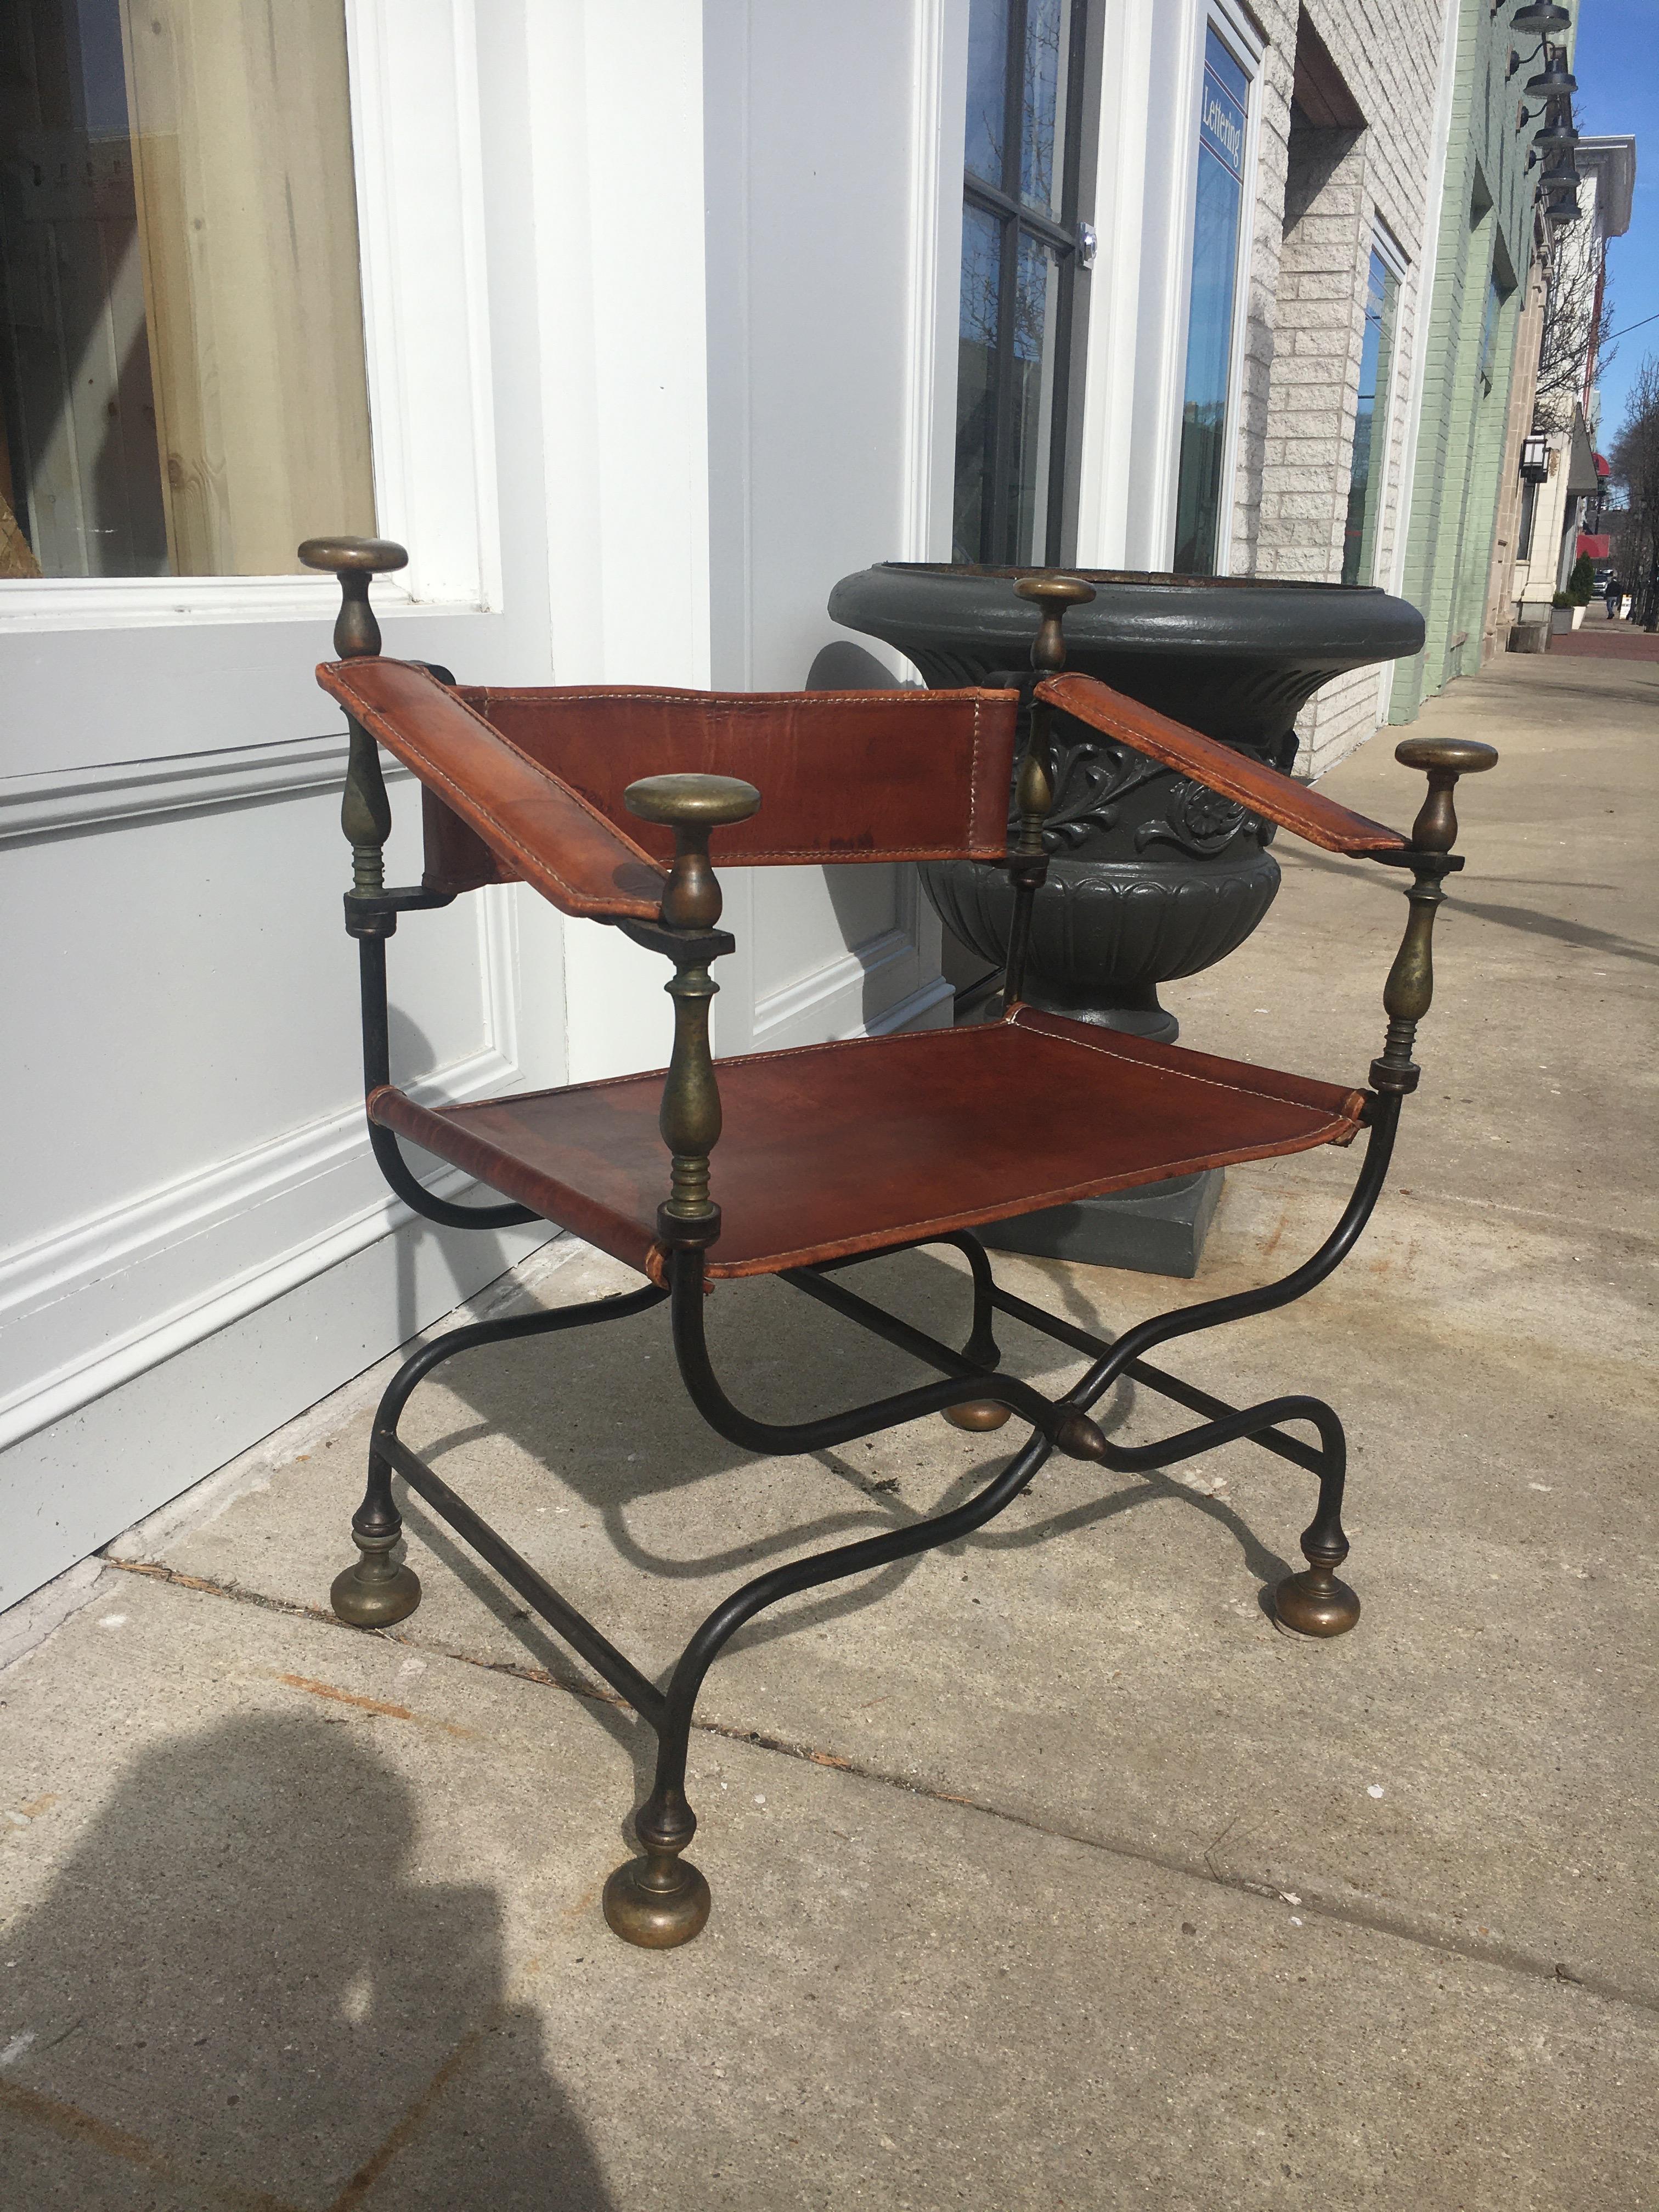 Stunning Italian iron and brass Savonarola Dante chair also known as x chairs or Curule chairs. Featuring a scissor form iron frame that folds in a Campaign style with bronze-mounted finials and feet. The seat, back, and arms are upholstered with